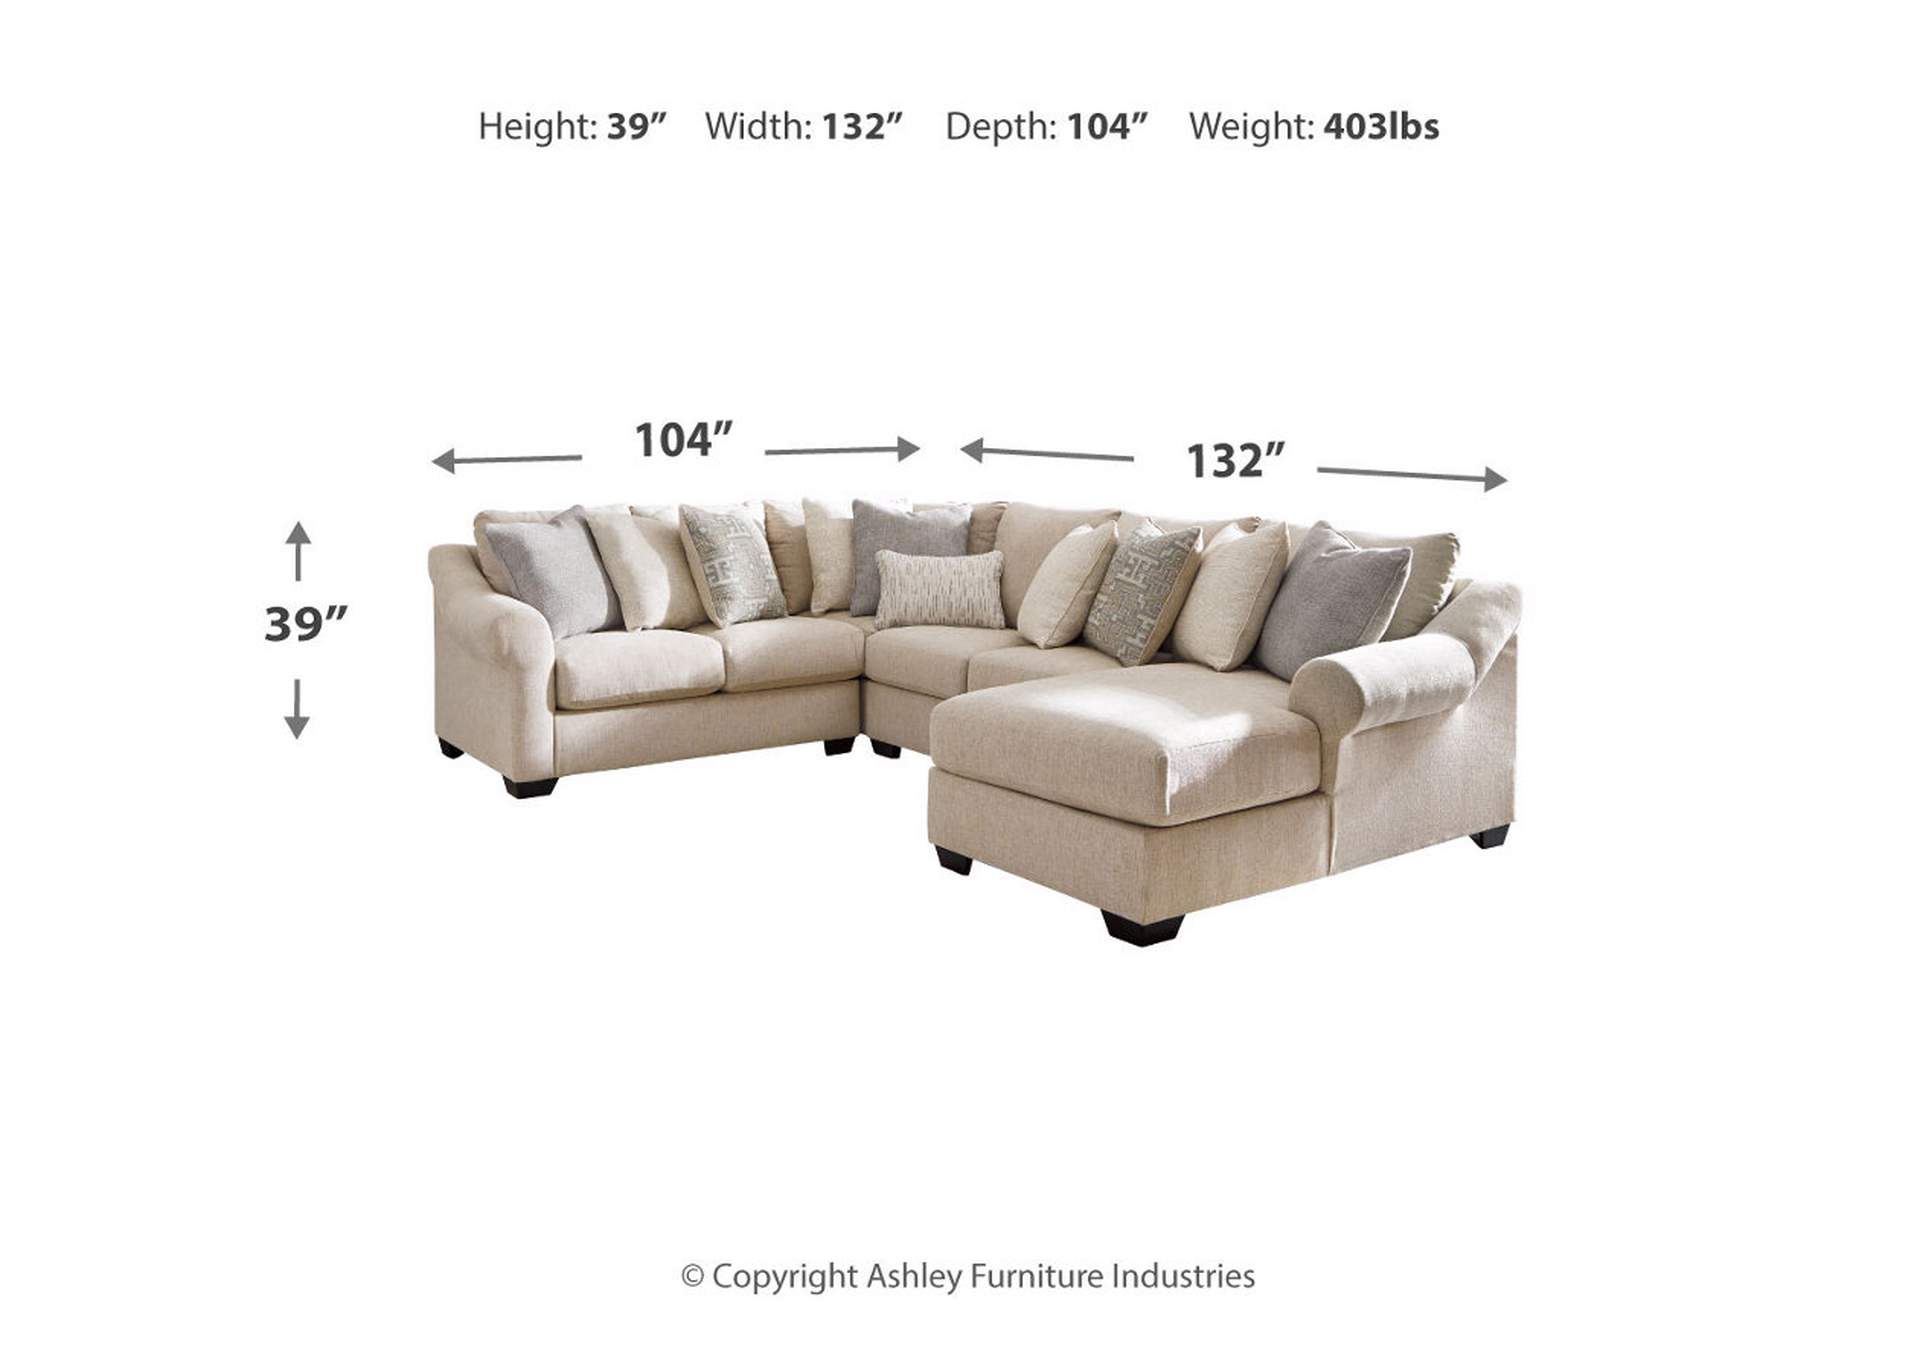 Carnaby 4-Piece Sectional with Ottoman,Ashley